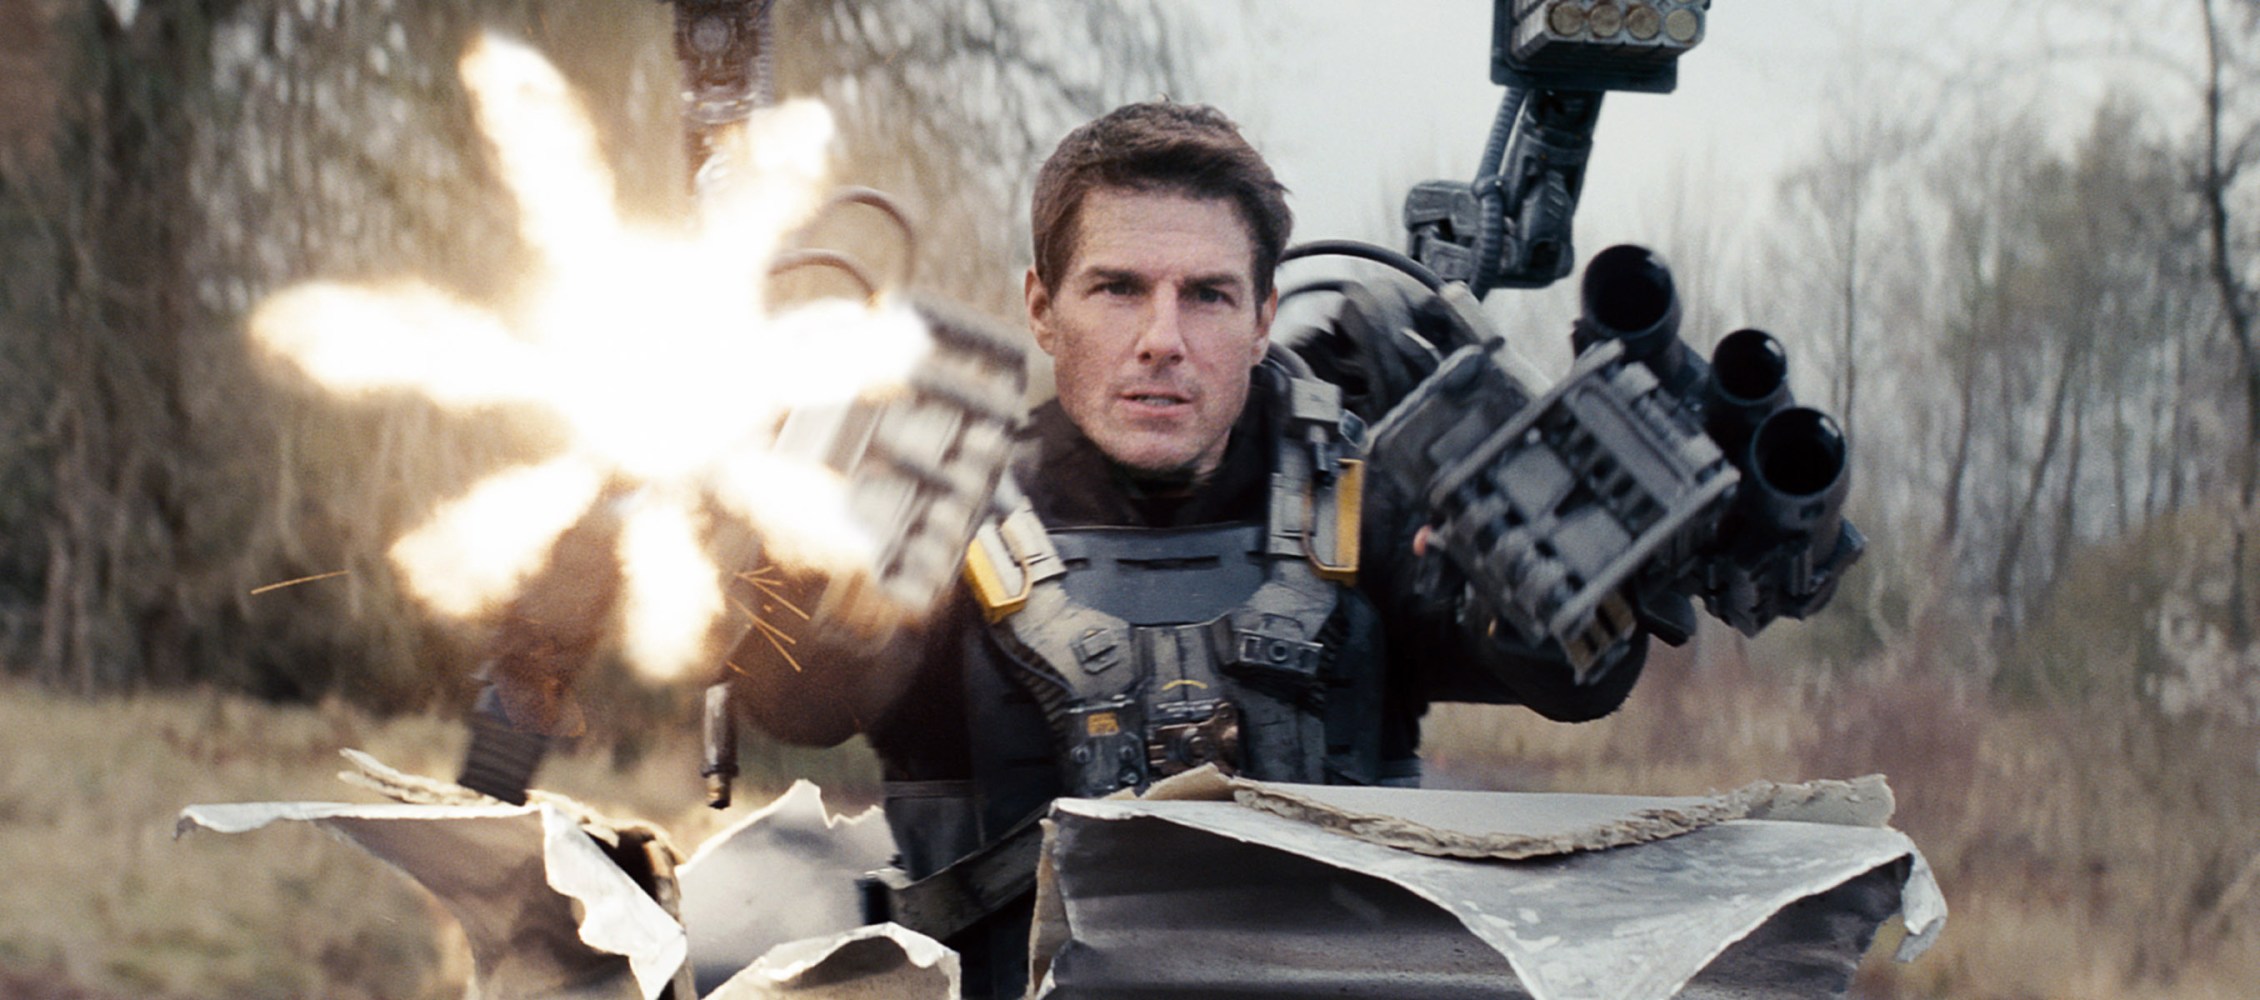 Tom Cruise Still Talks to ‘Edge of Tomorrow’ Director About Making a Sequel, Even 10 Years Later; Doug Liman Says: ‘We Love That World’